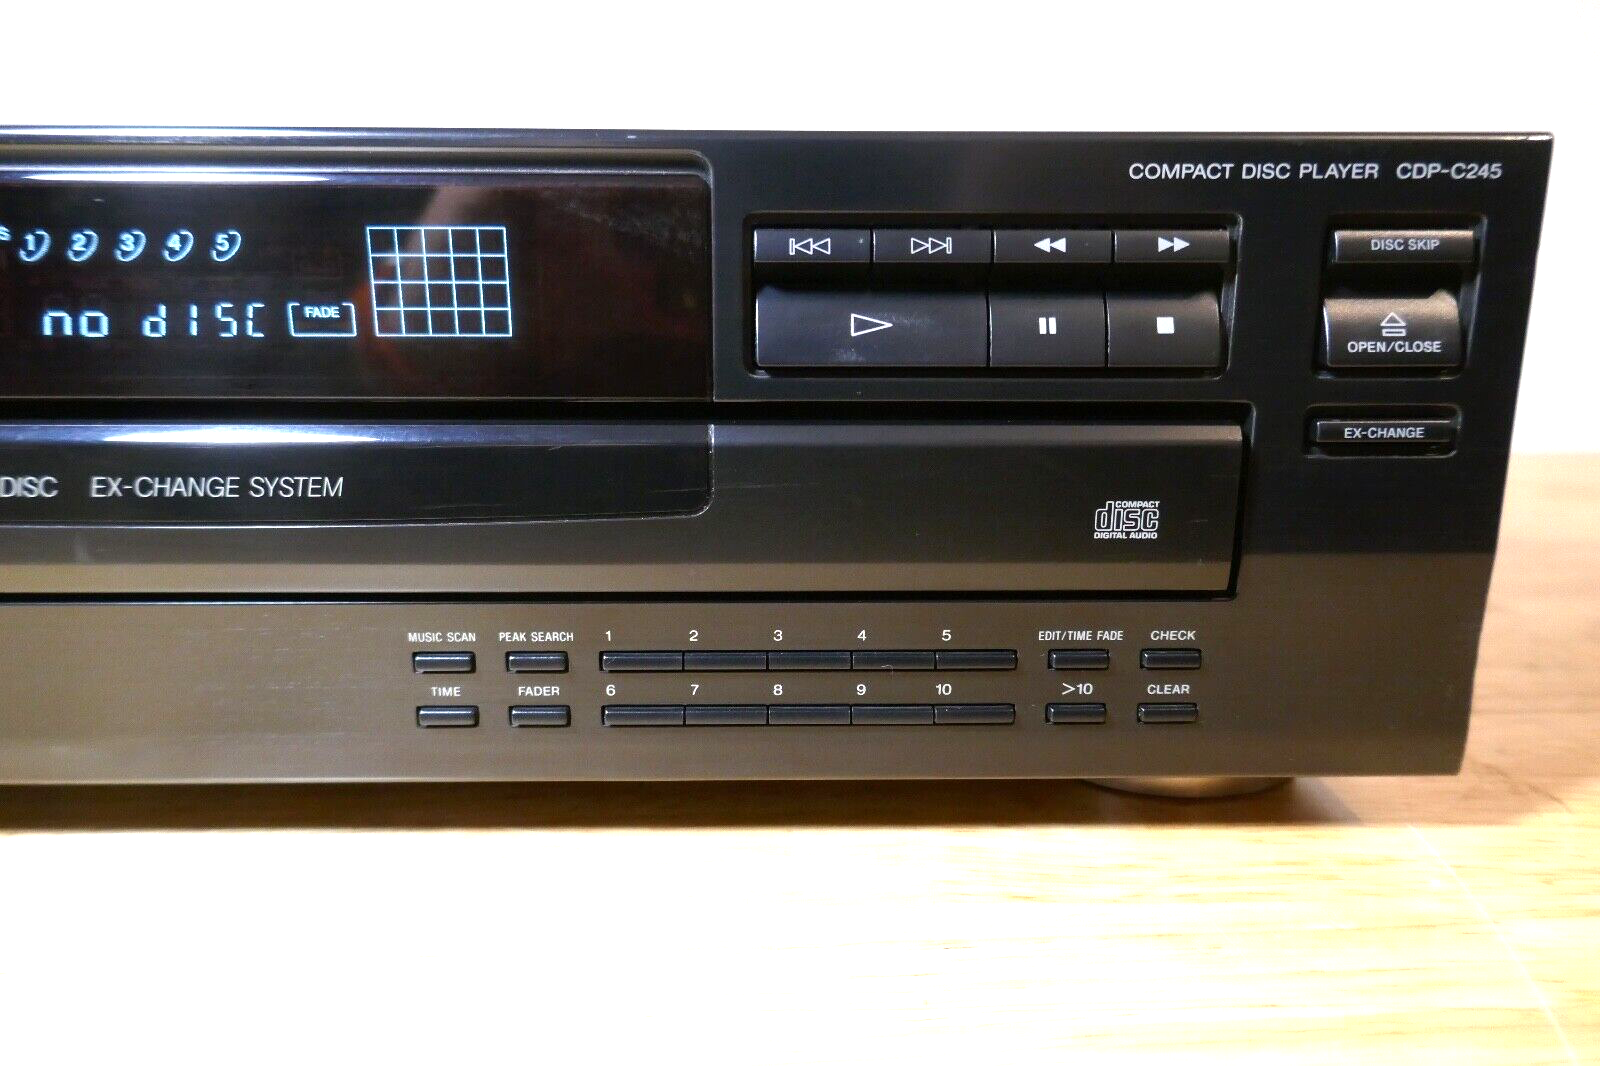 lecteur compact disc player sony CDP-C245 vintage occasion